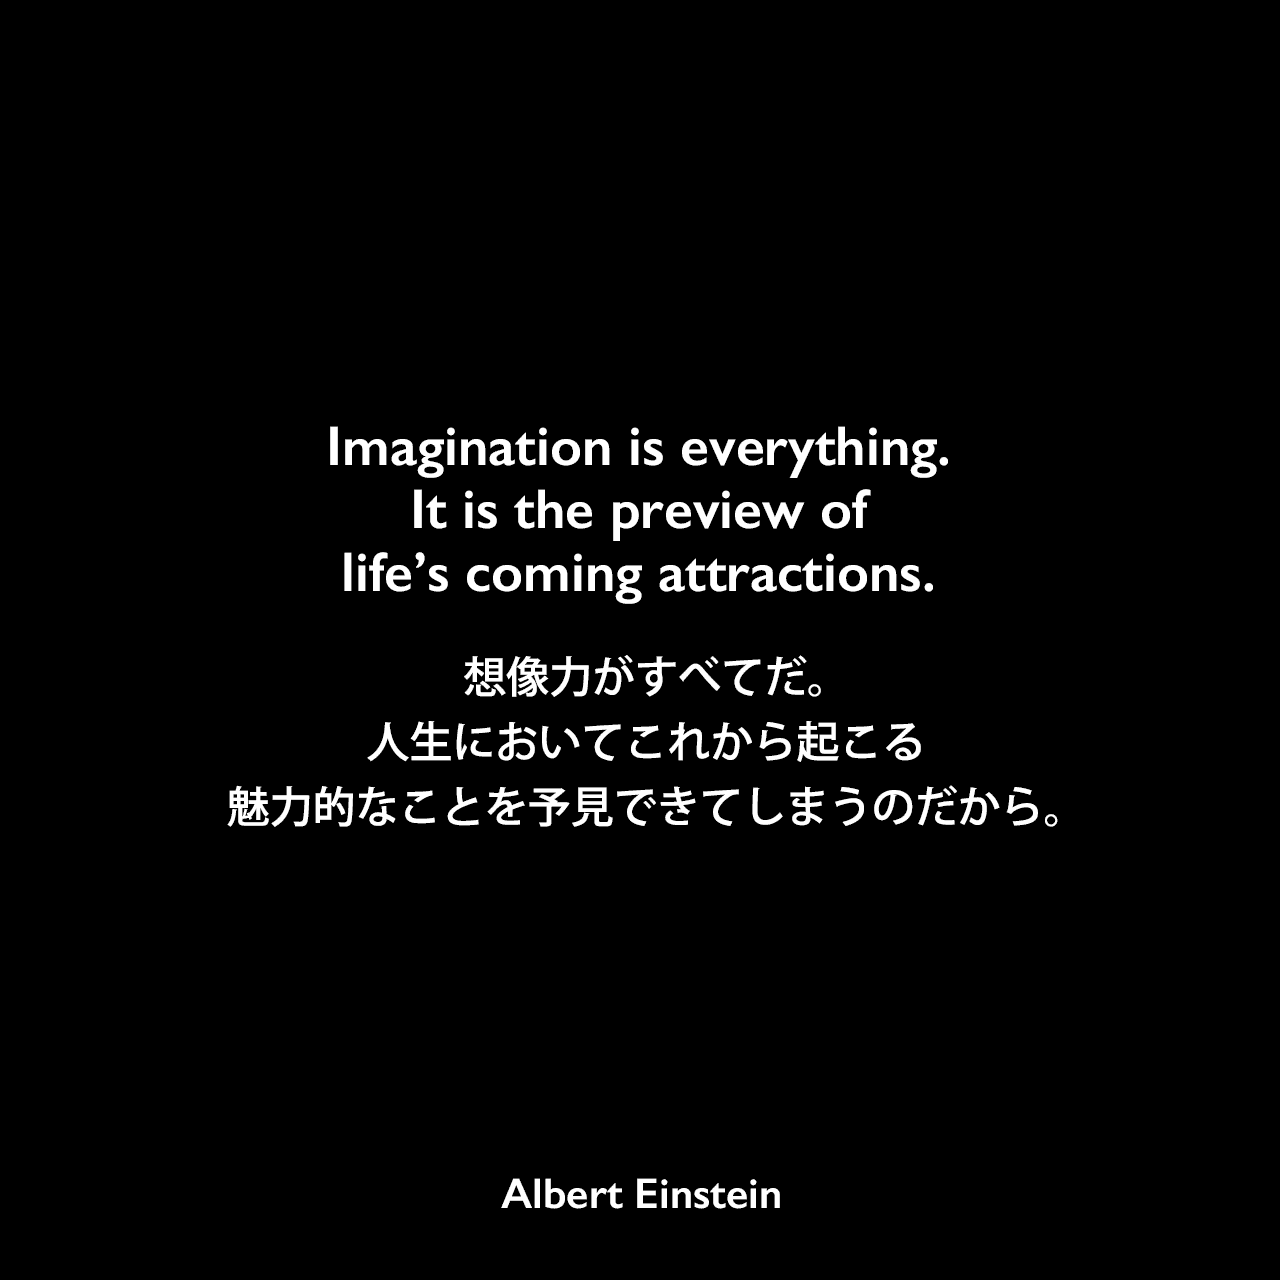 Imagination is everything. It is the preview of life’s coming attractions.想像力がすべてだ。人生においてこれから起こる魅力的なことを予見できてしまうのだから。Albert Einstein